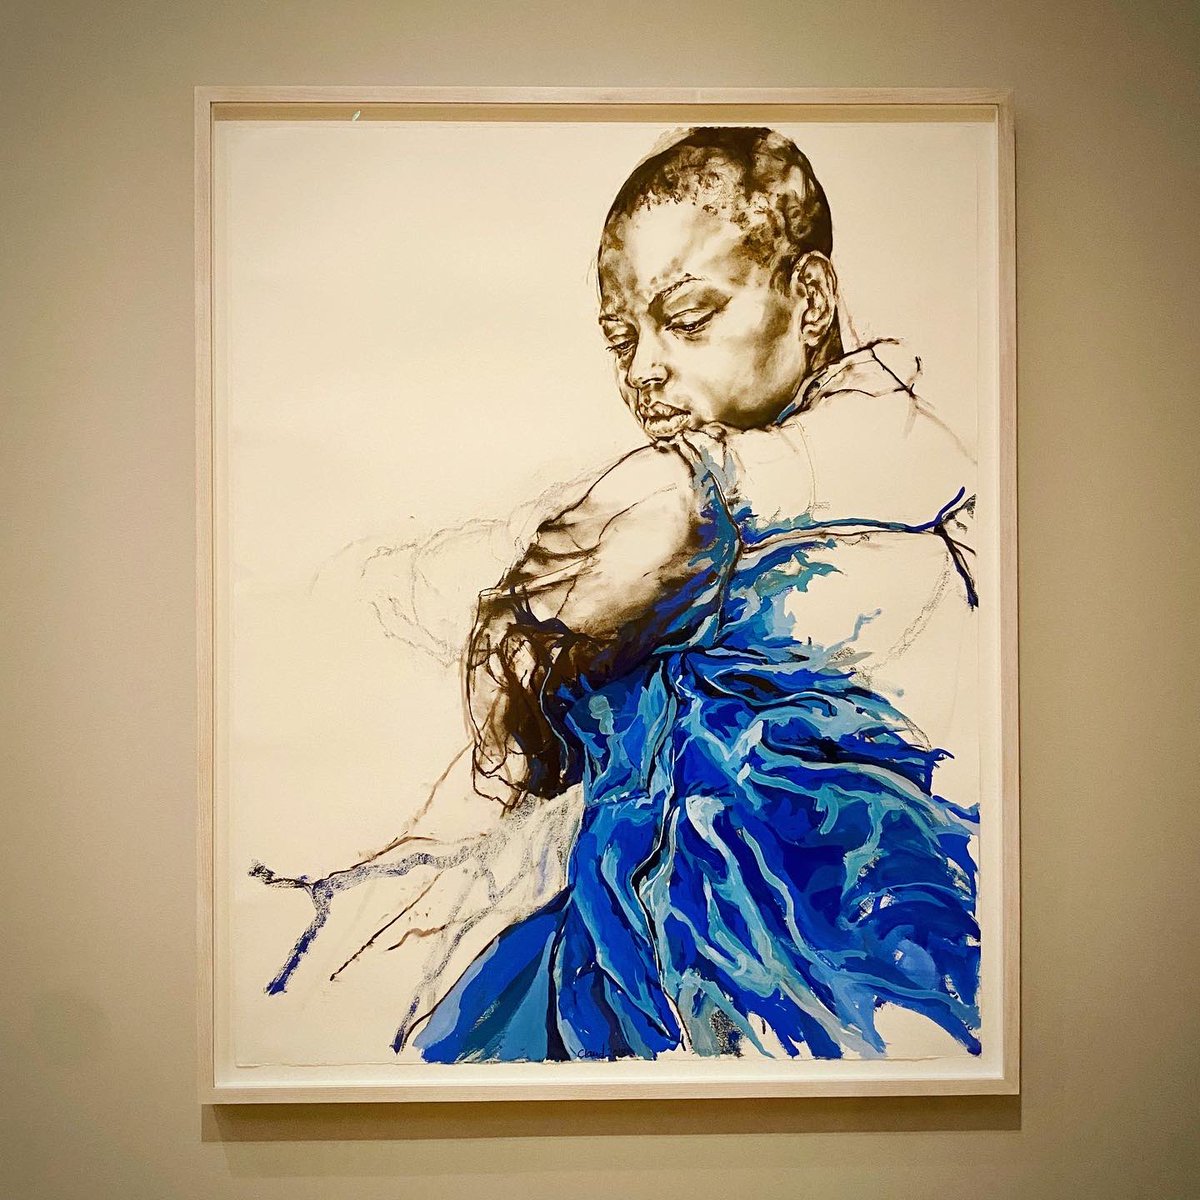 Claudette Johnson, ‘Presence’ at the Courtauld Gallery, London. Great to catch this essential exhibition during Frieze week #claudettejohnson #presence #britishart #courtauldgallery #courtauldinstituteofart @TheCourtauld